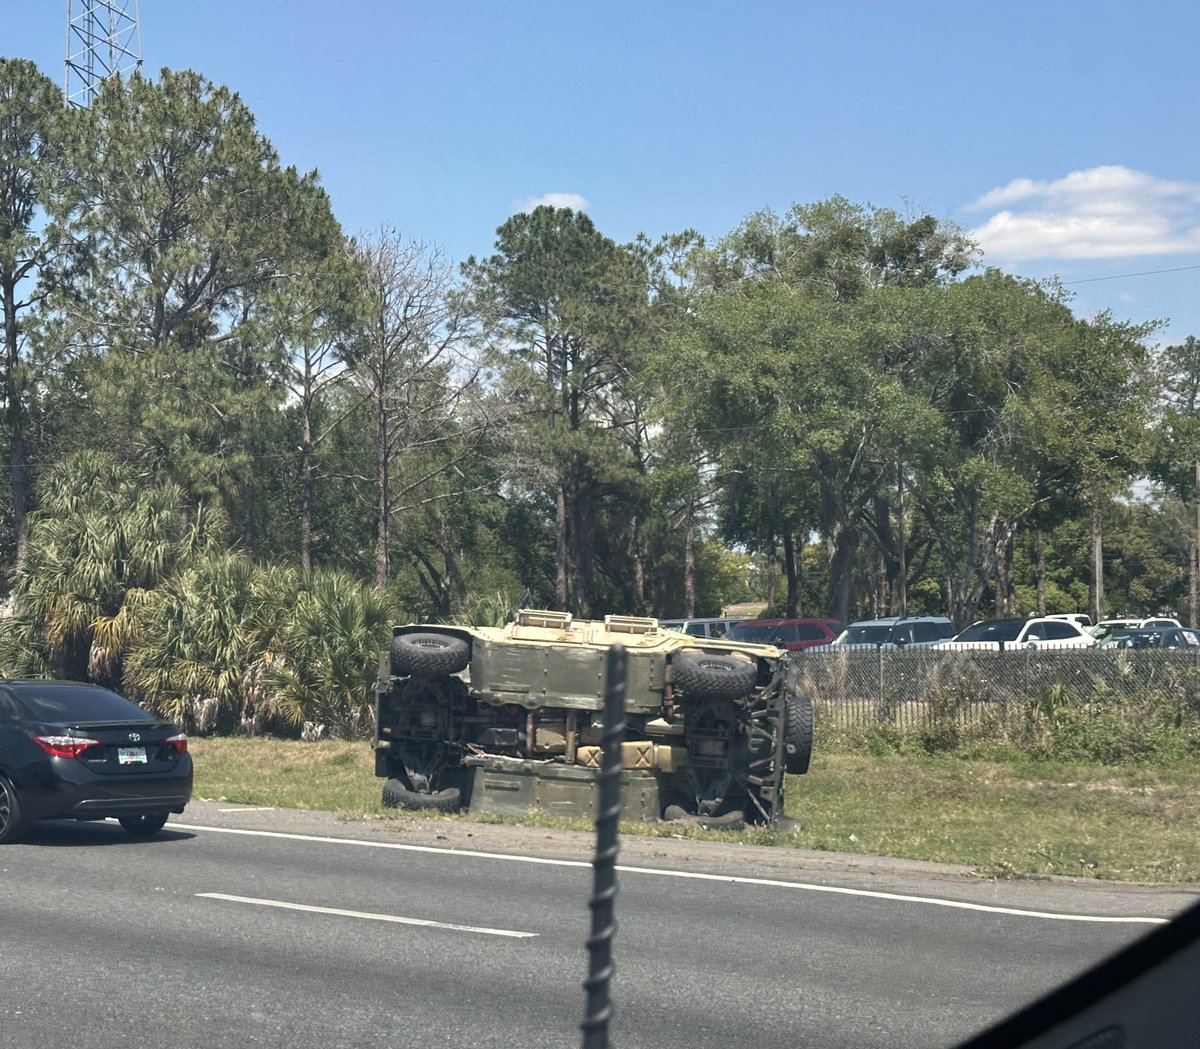 *** CRASH *** EB I-4 at Lake Mary Blvd - right shoulder - overturned military convoy hummer - delays building as first responders arrive #wednesday #crash #military #seminole #lakemary